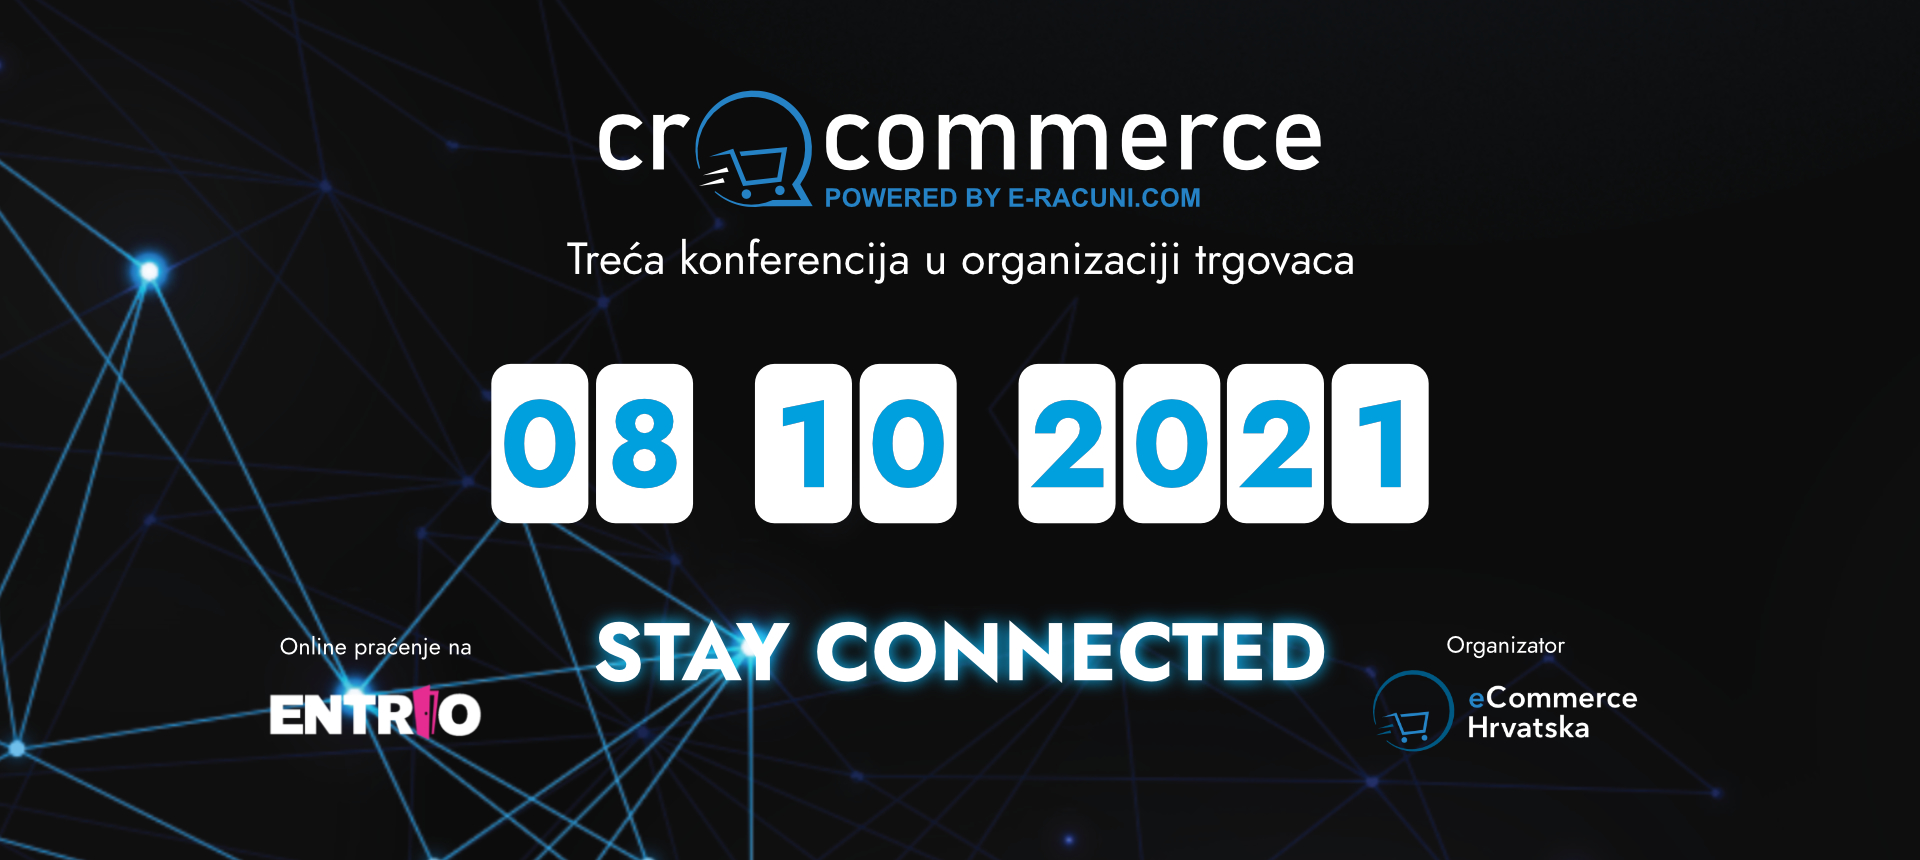 CRO Commerce 2021 powered by e-racuni.com